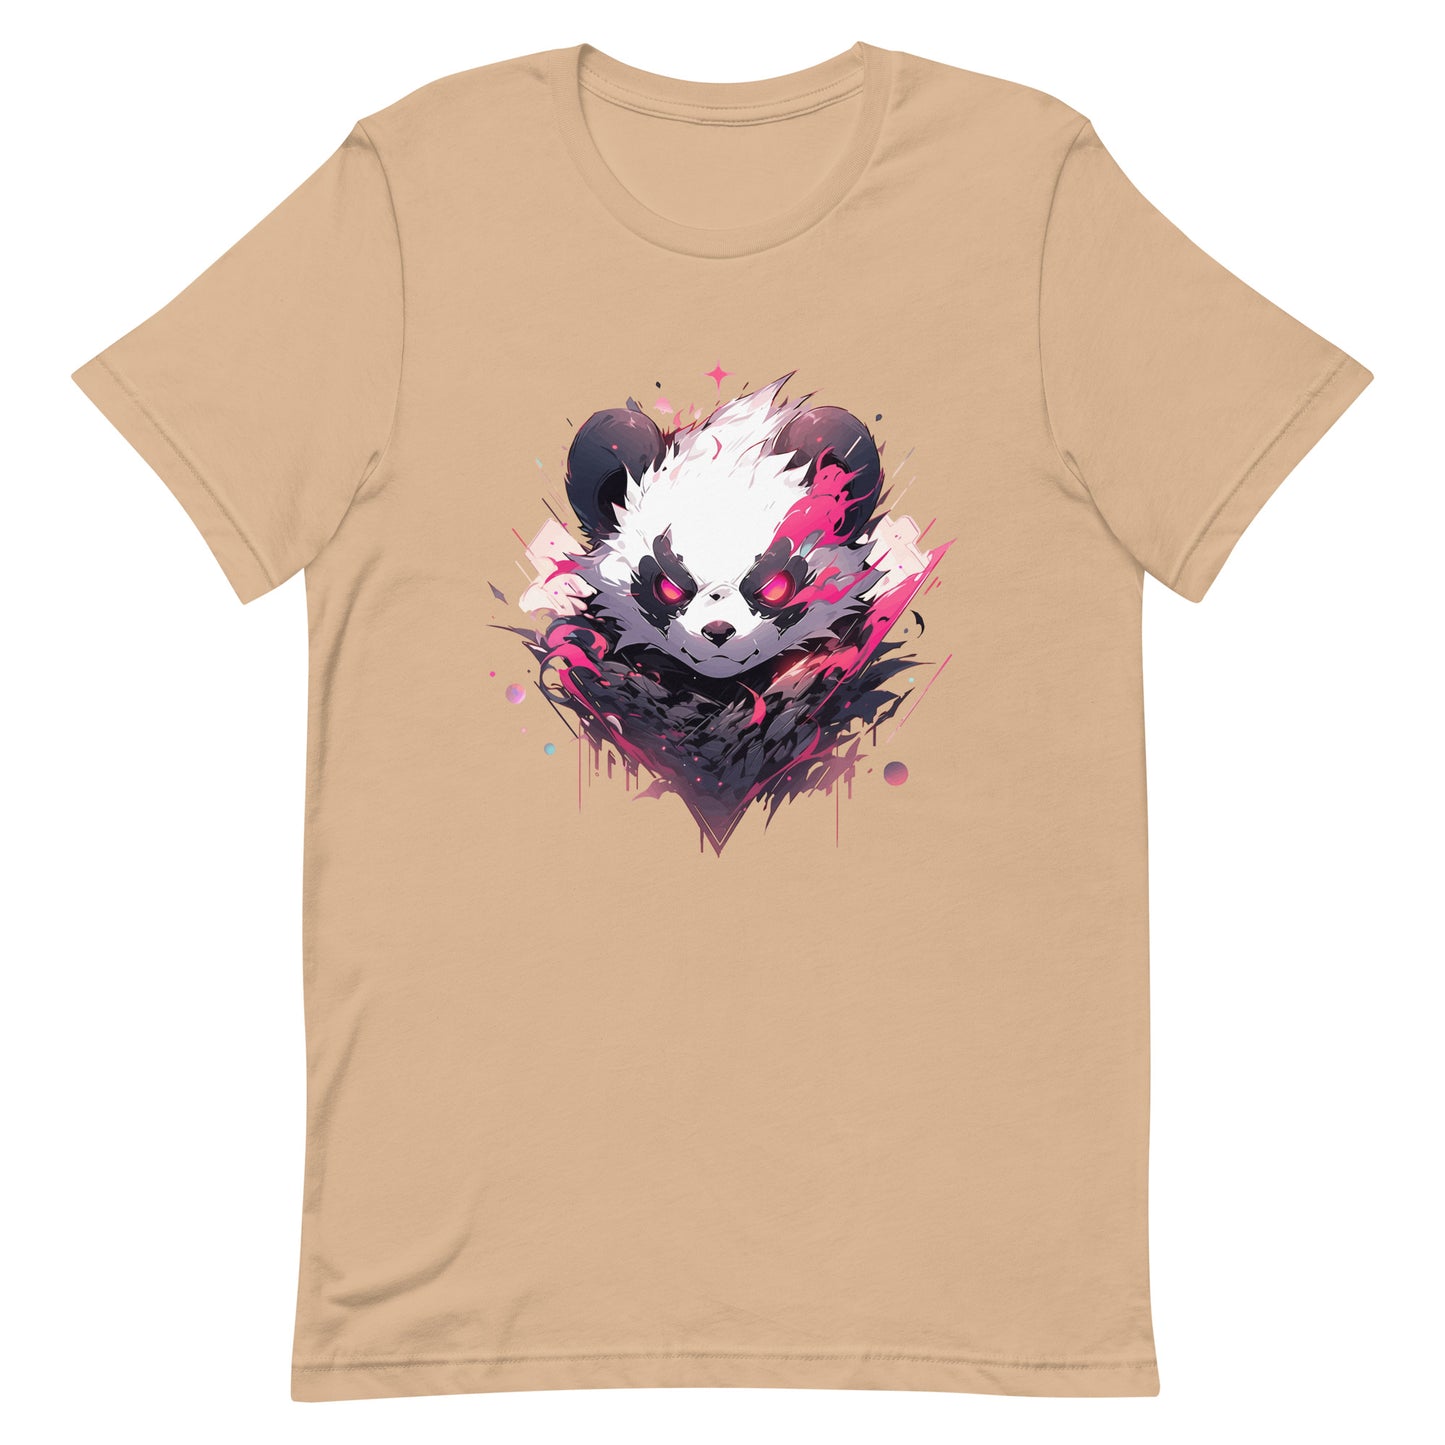 Black and white bear, Bamboo bear in jungle, Most angry panda in district, Red eyes animal wild - Unisex t-shirt